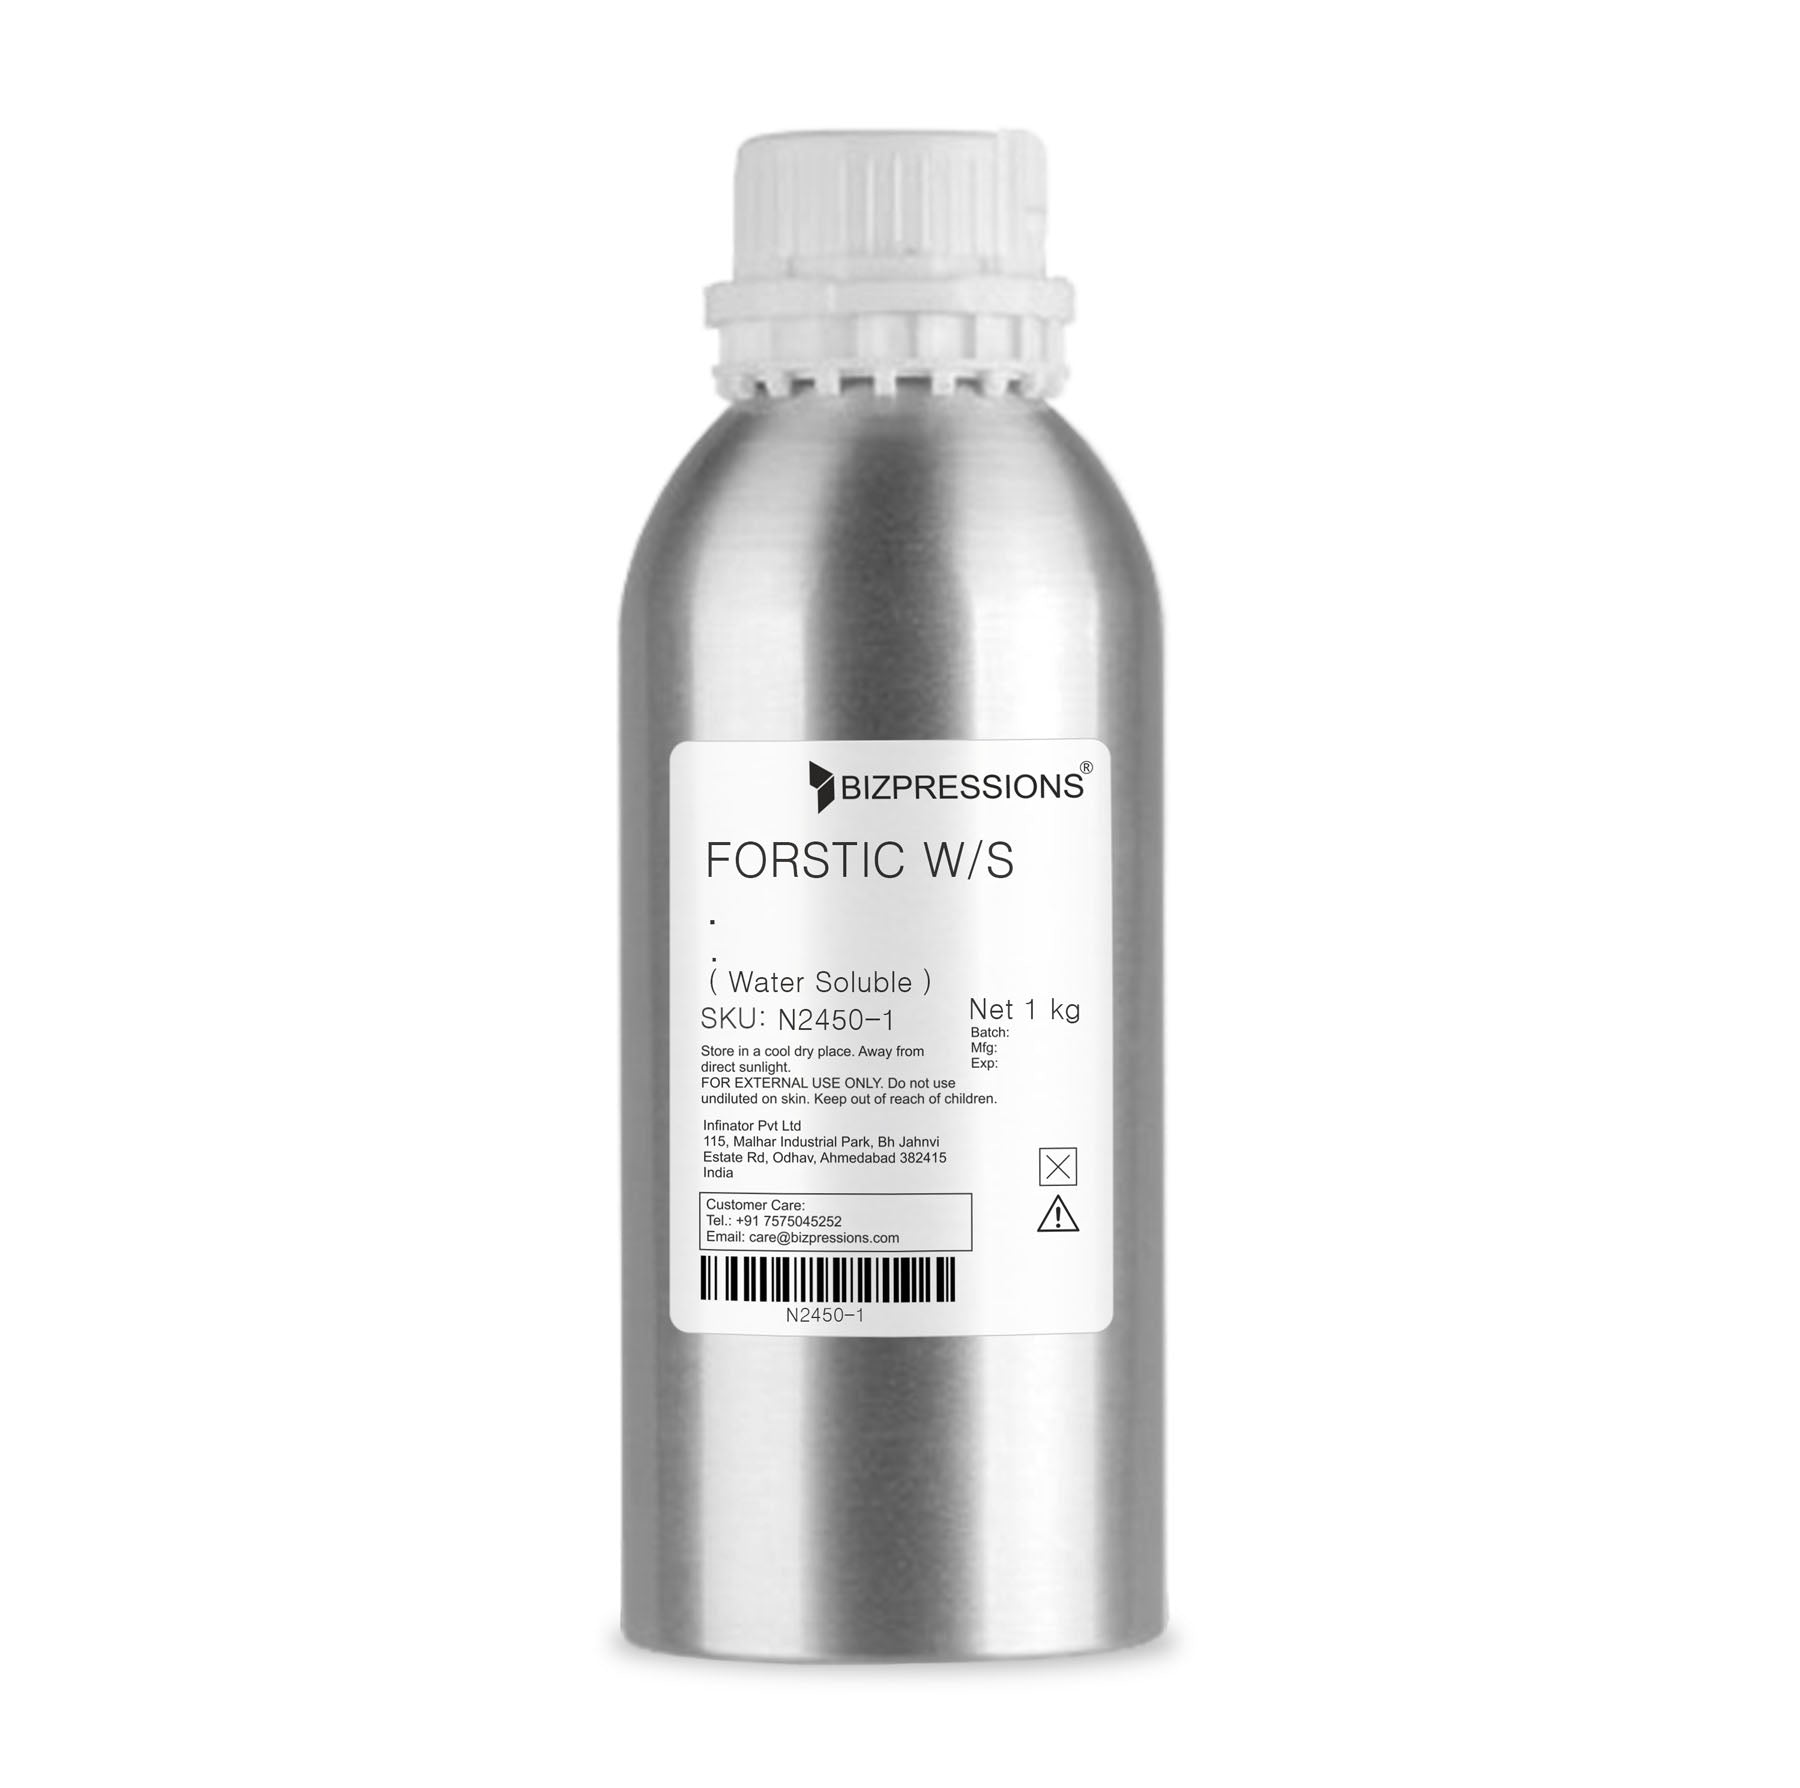 FORSTIC W/S - Fragrance ( Water Soluble ) - 1 kg